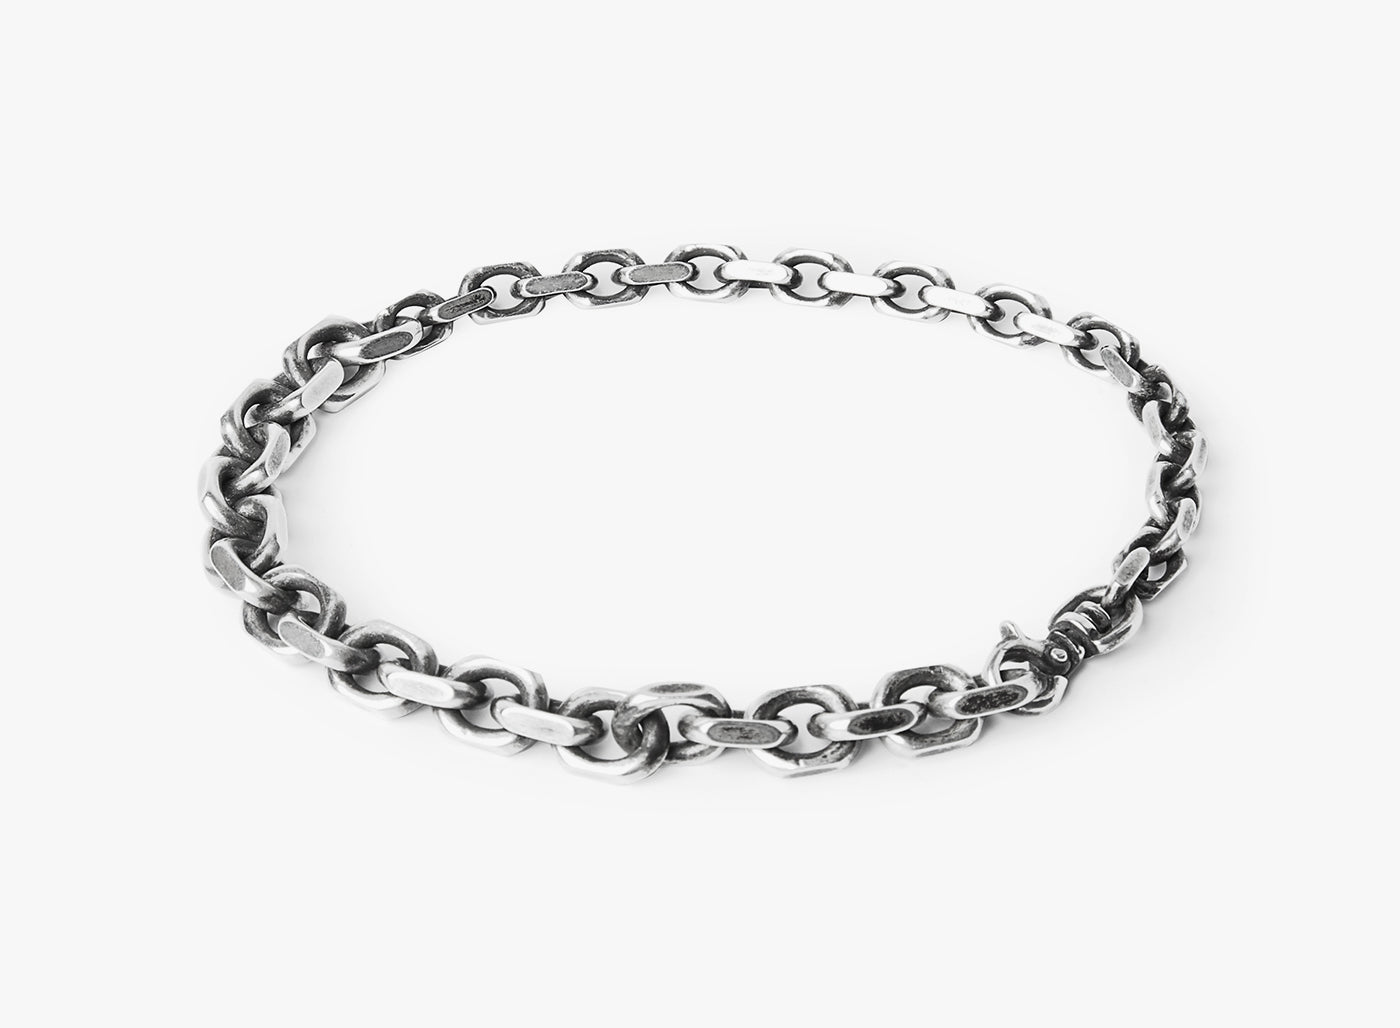 MIXED CHAIN BRACELET 212: a large cable chain connects to a small cable chain, fastened by a carabiner lobster clasp.